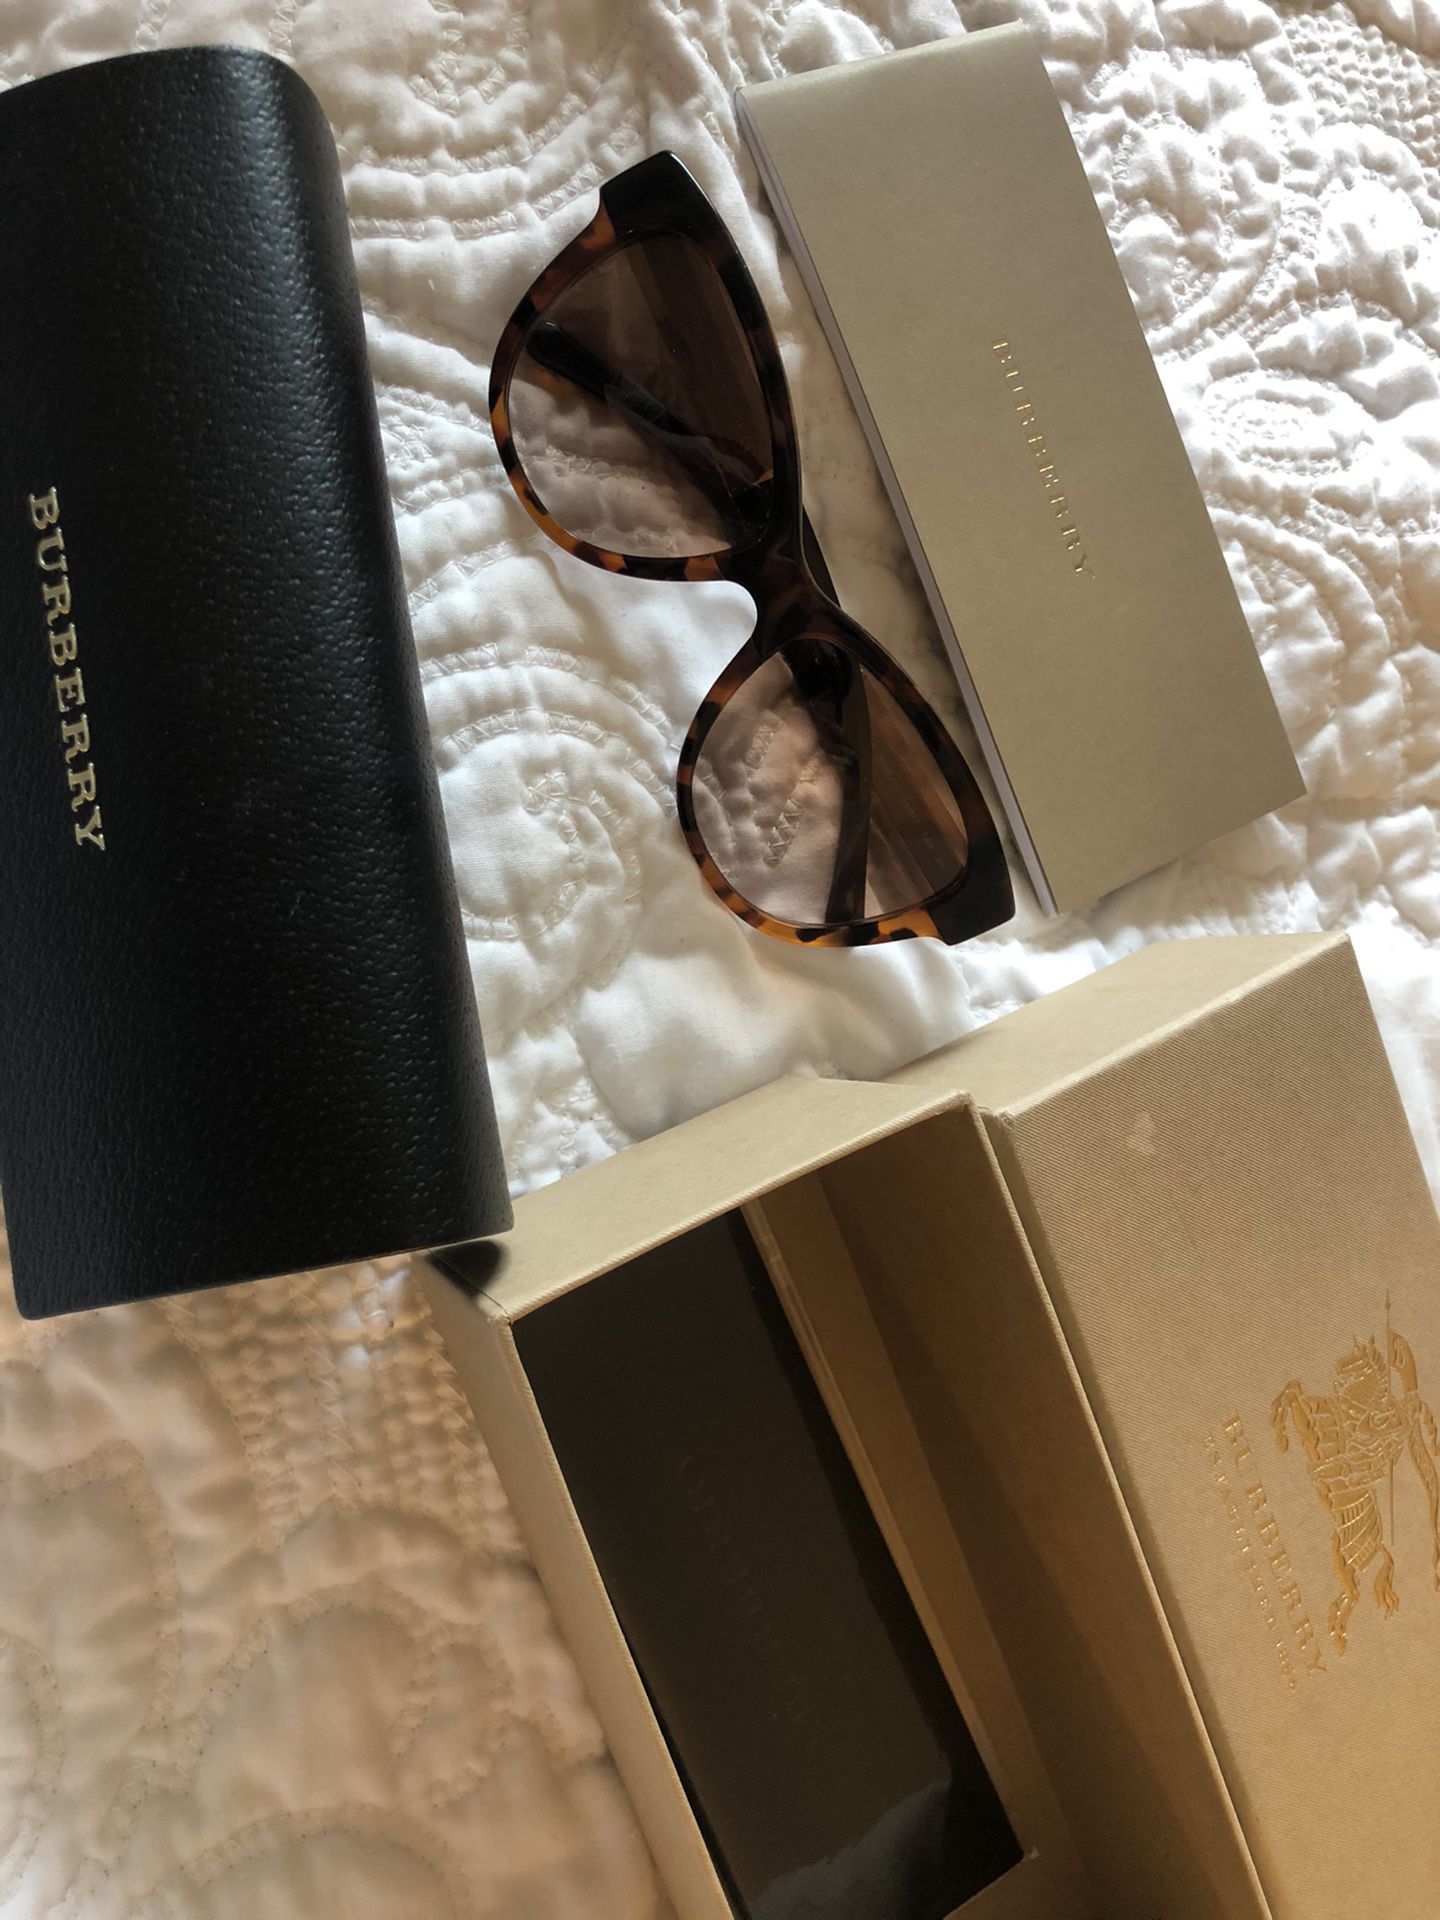 Brand new Burberry sunglasses (comes with everything in images)